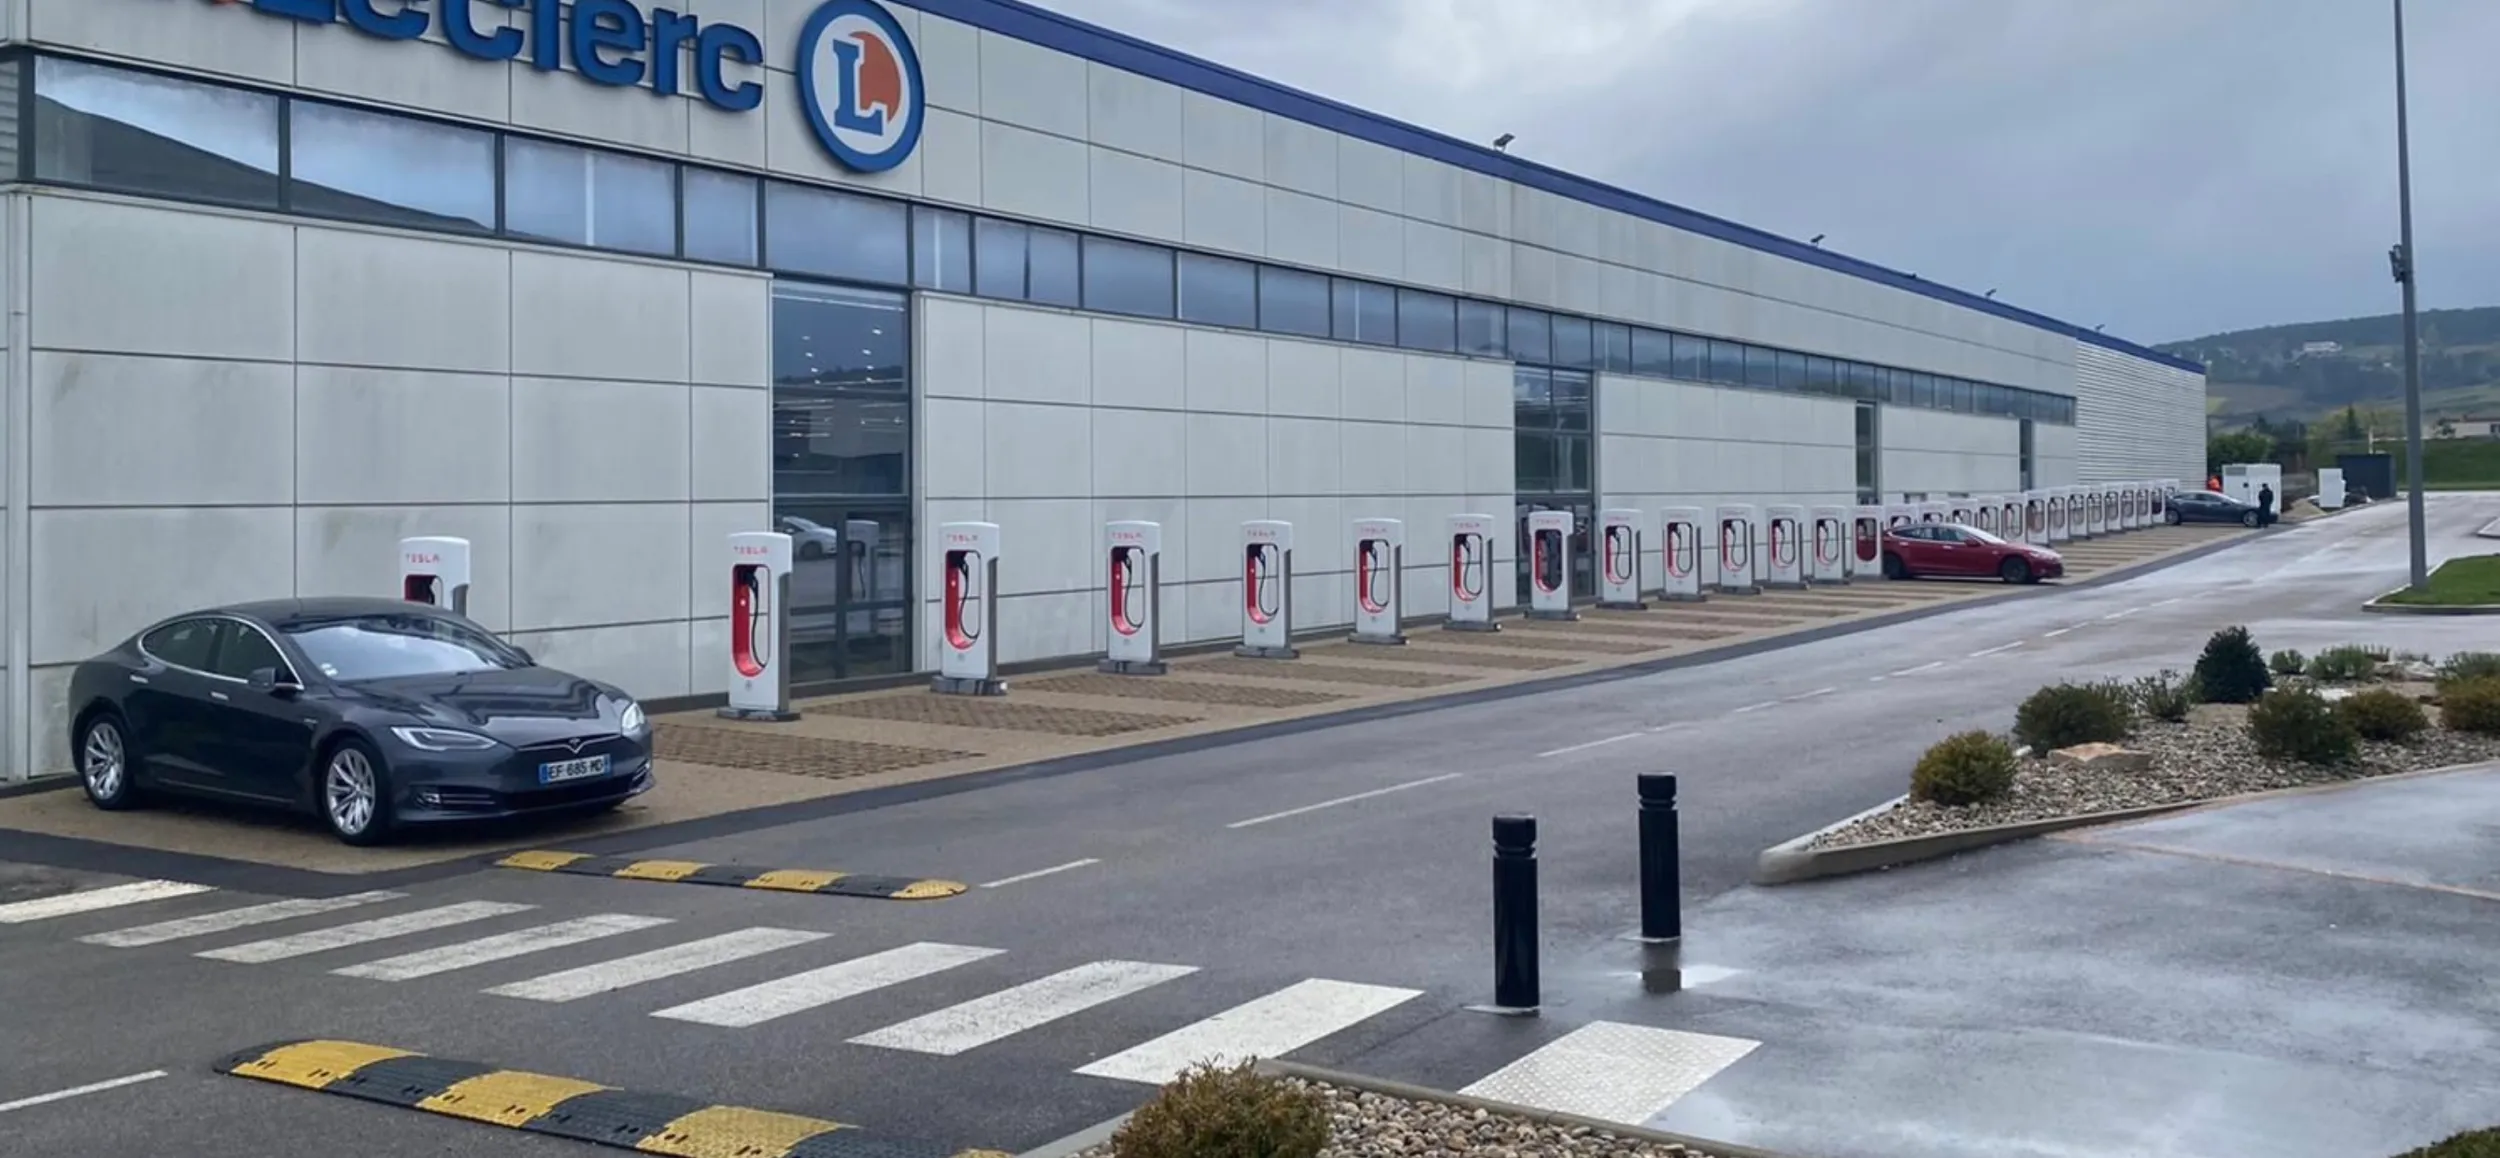 Tesla Supercharger outlet at E.Leclerc Beaune in France